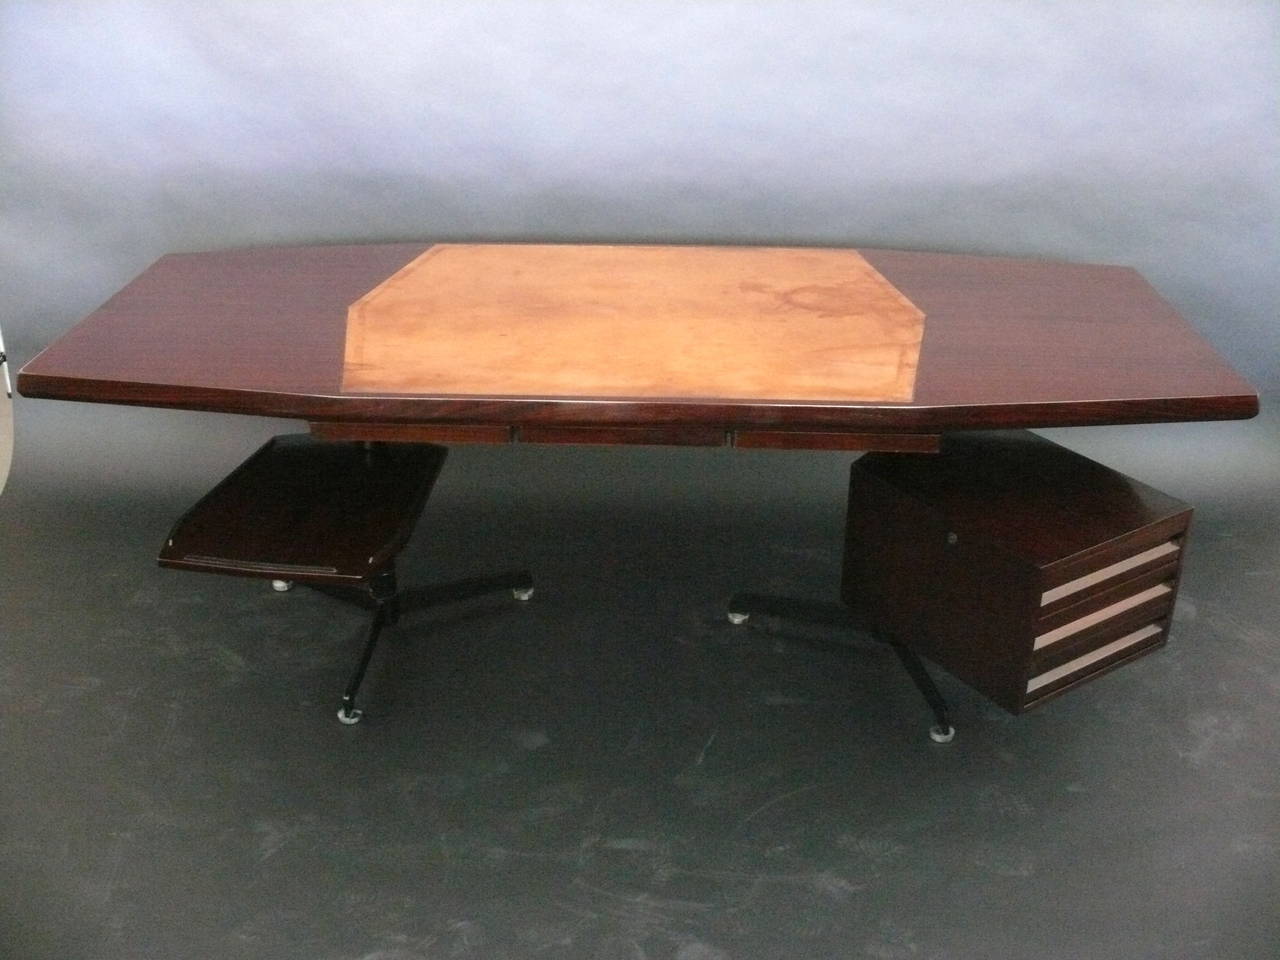 Handsome rosewood desk by Osvaldo Borsani. Pull-out tray table and set of drawers both revolve 360 degrees. Beautiful saddle leather inlaid desk blotter in original condition with great patina. The desk sits upon two tripod blackened nickel bases.